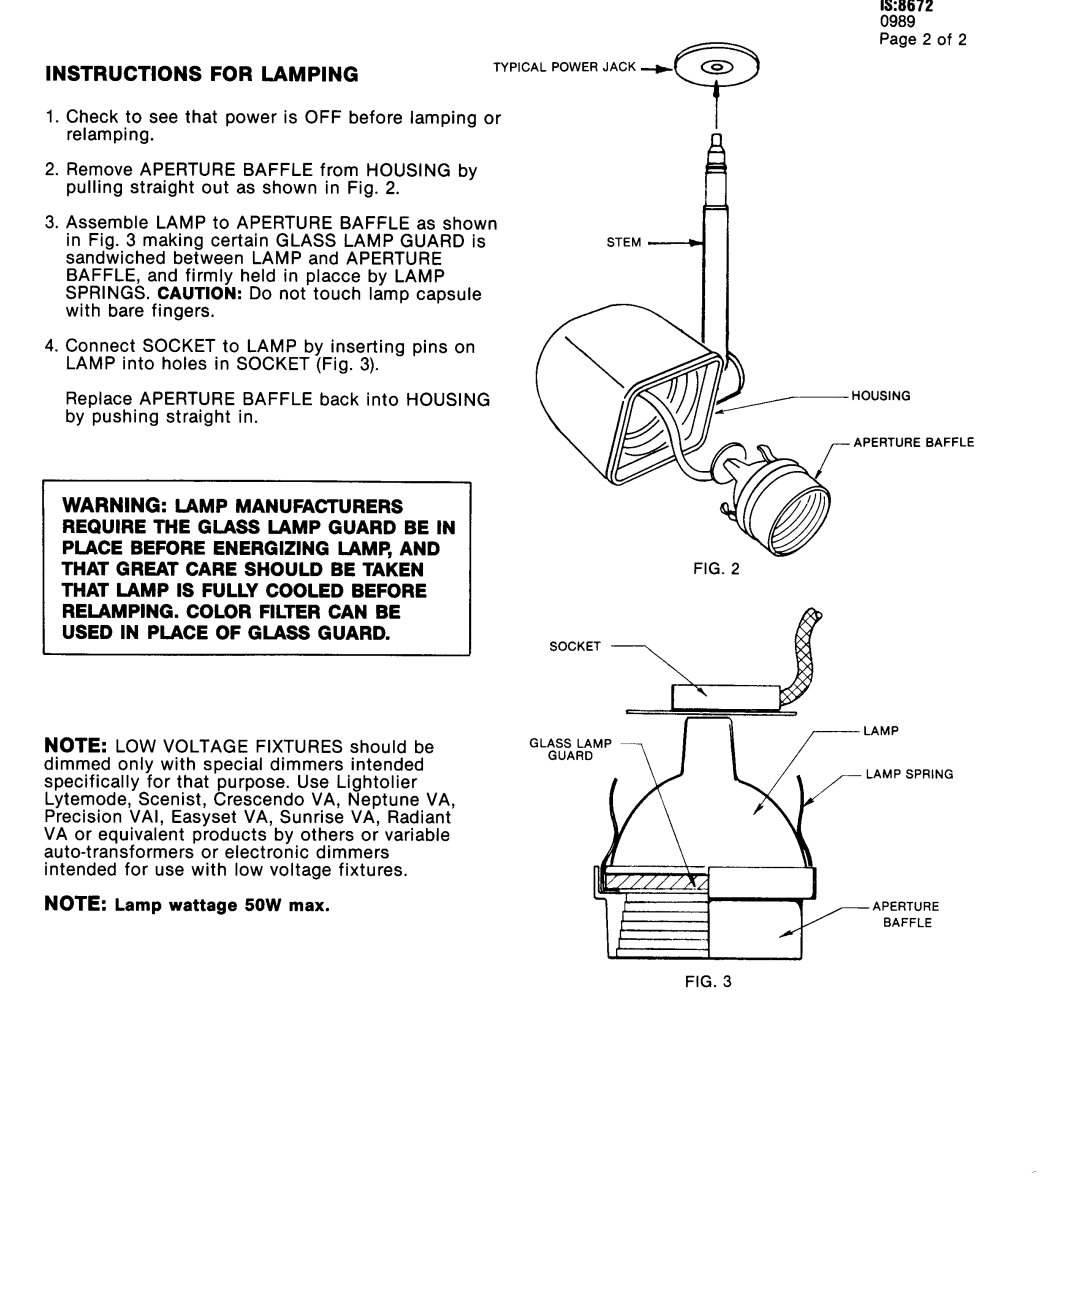 Lightolier 8672 instruction sheet Instructions For Lamping, Used In Place Of Glass Guard 